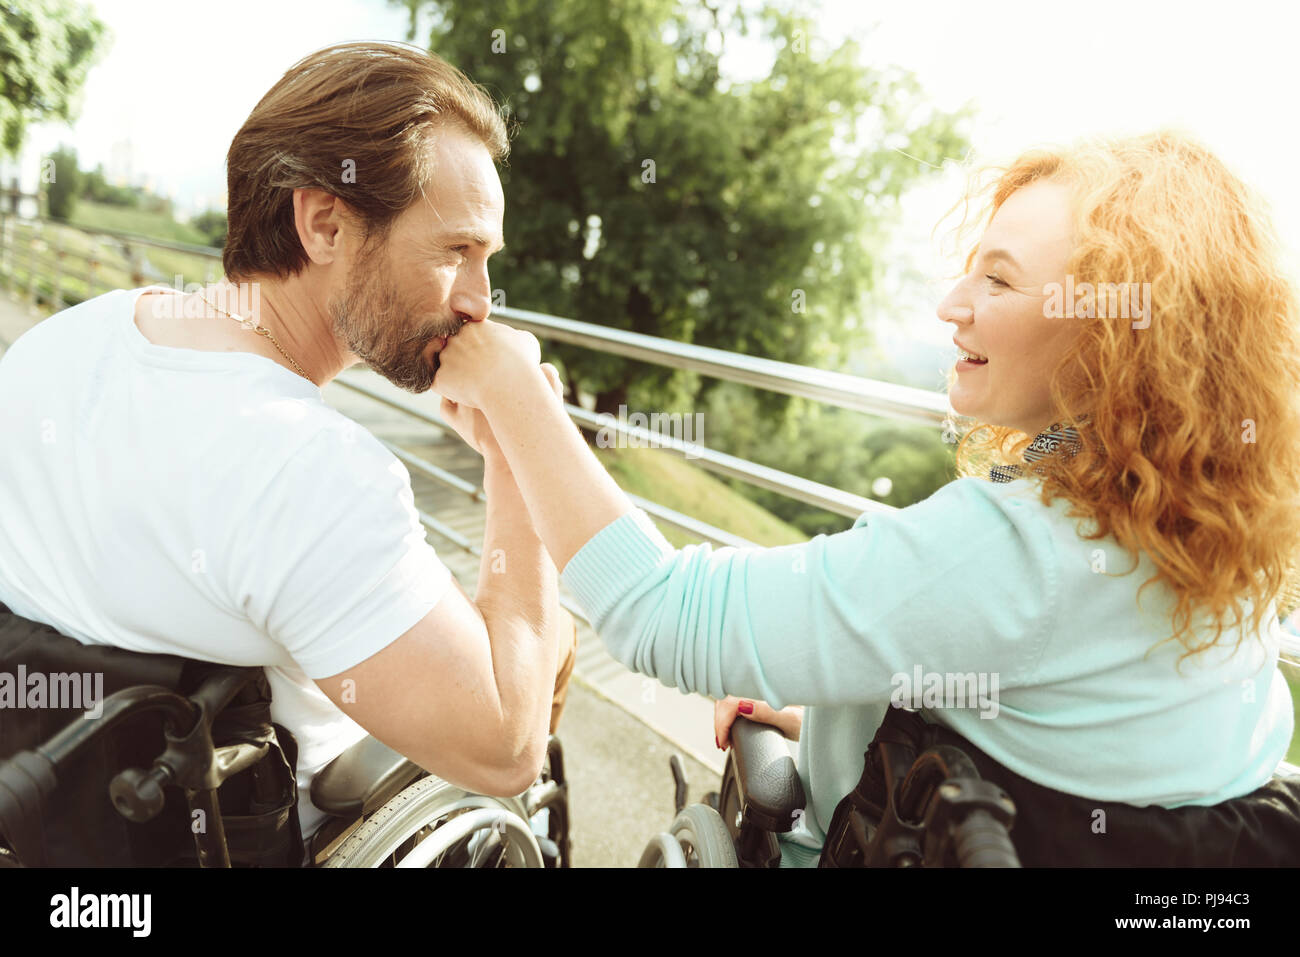 Fell in love mature man kissing hand of woman Stock Photo